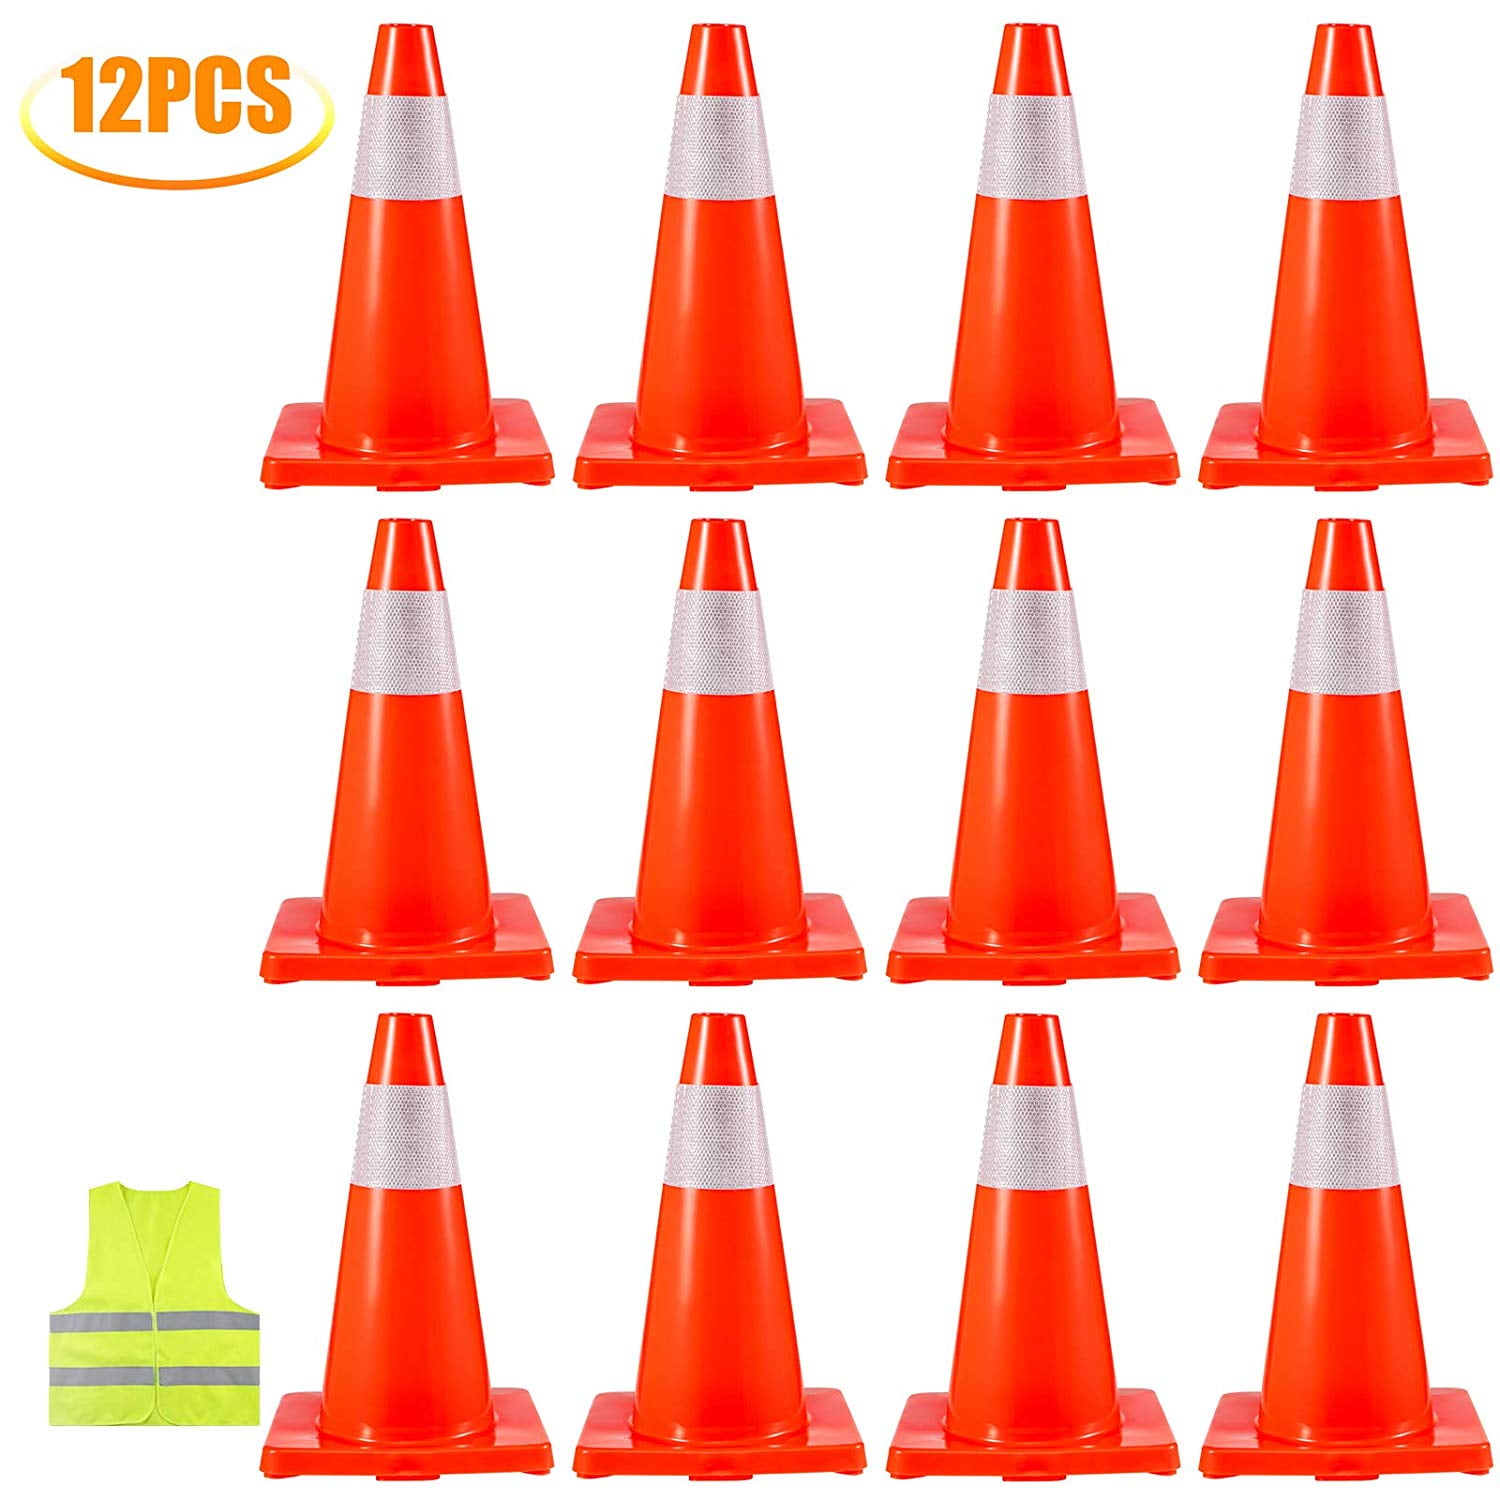 2PK Collapsible 18" Reflective Pop Up Safety Extendable Traffic Cone w LED Light 